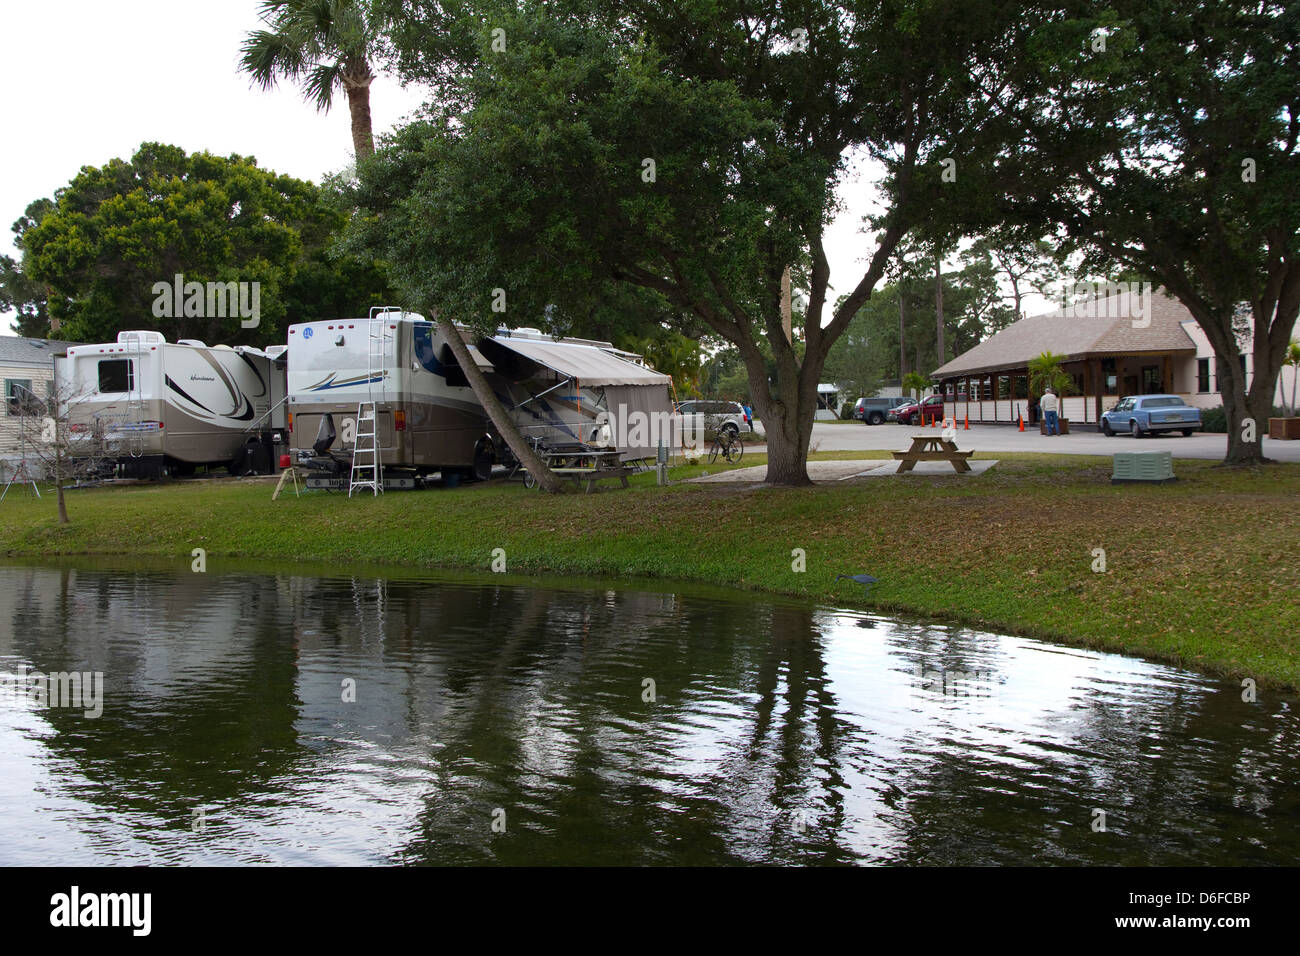 Road Runner Travel Resort is one of south Florida's finest RV campgrounds, Ft. Pierce, FL Stock Photo